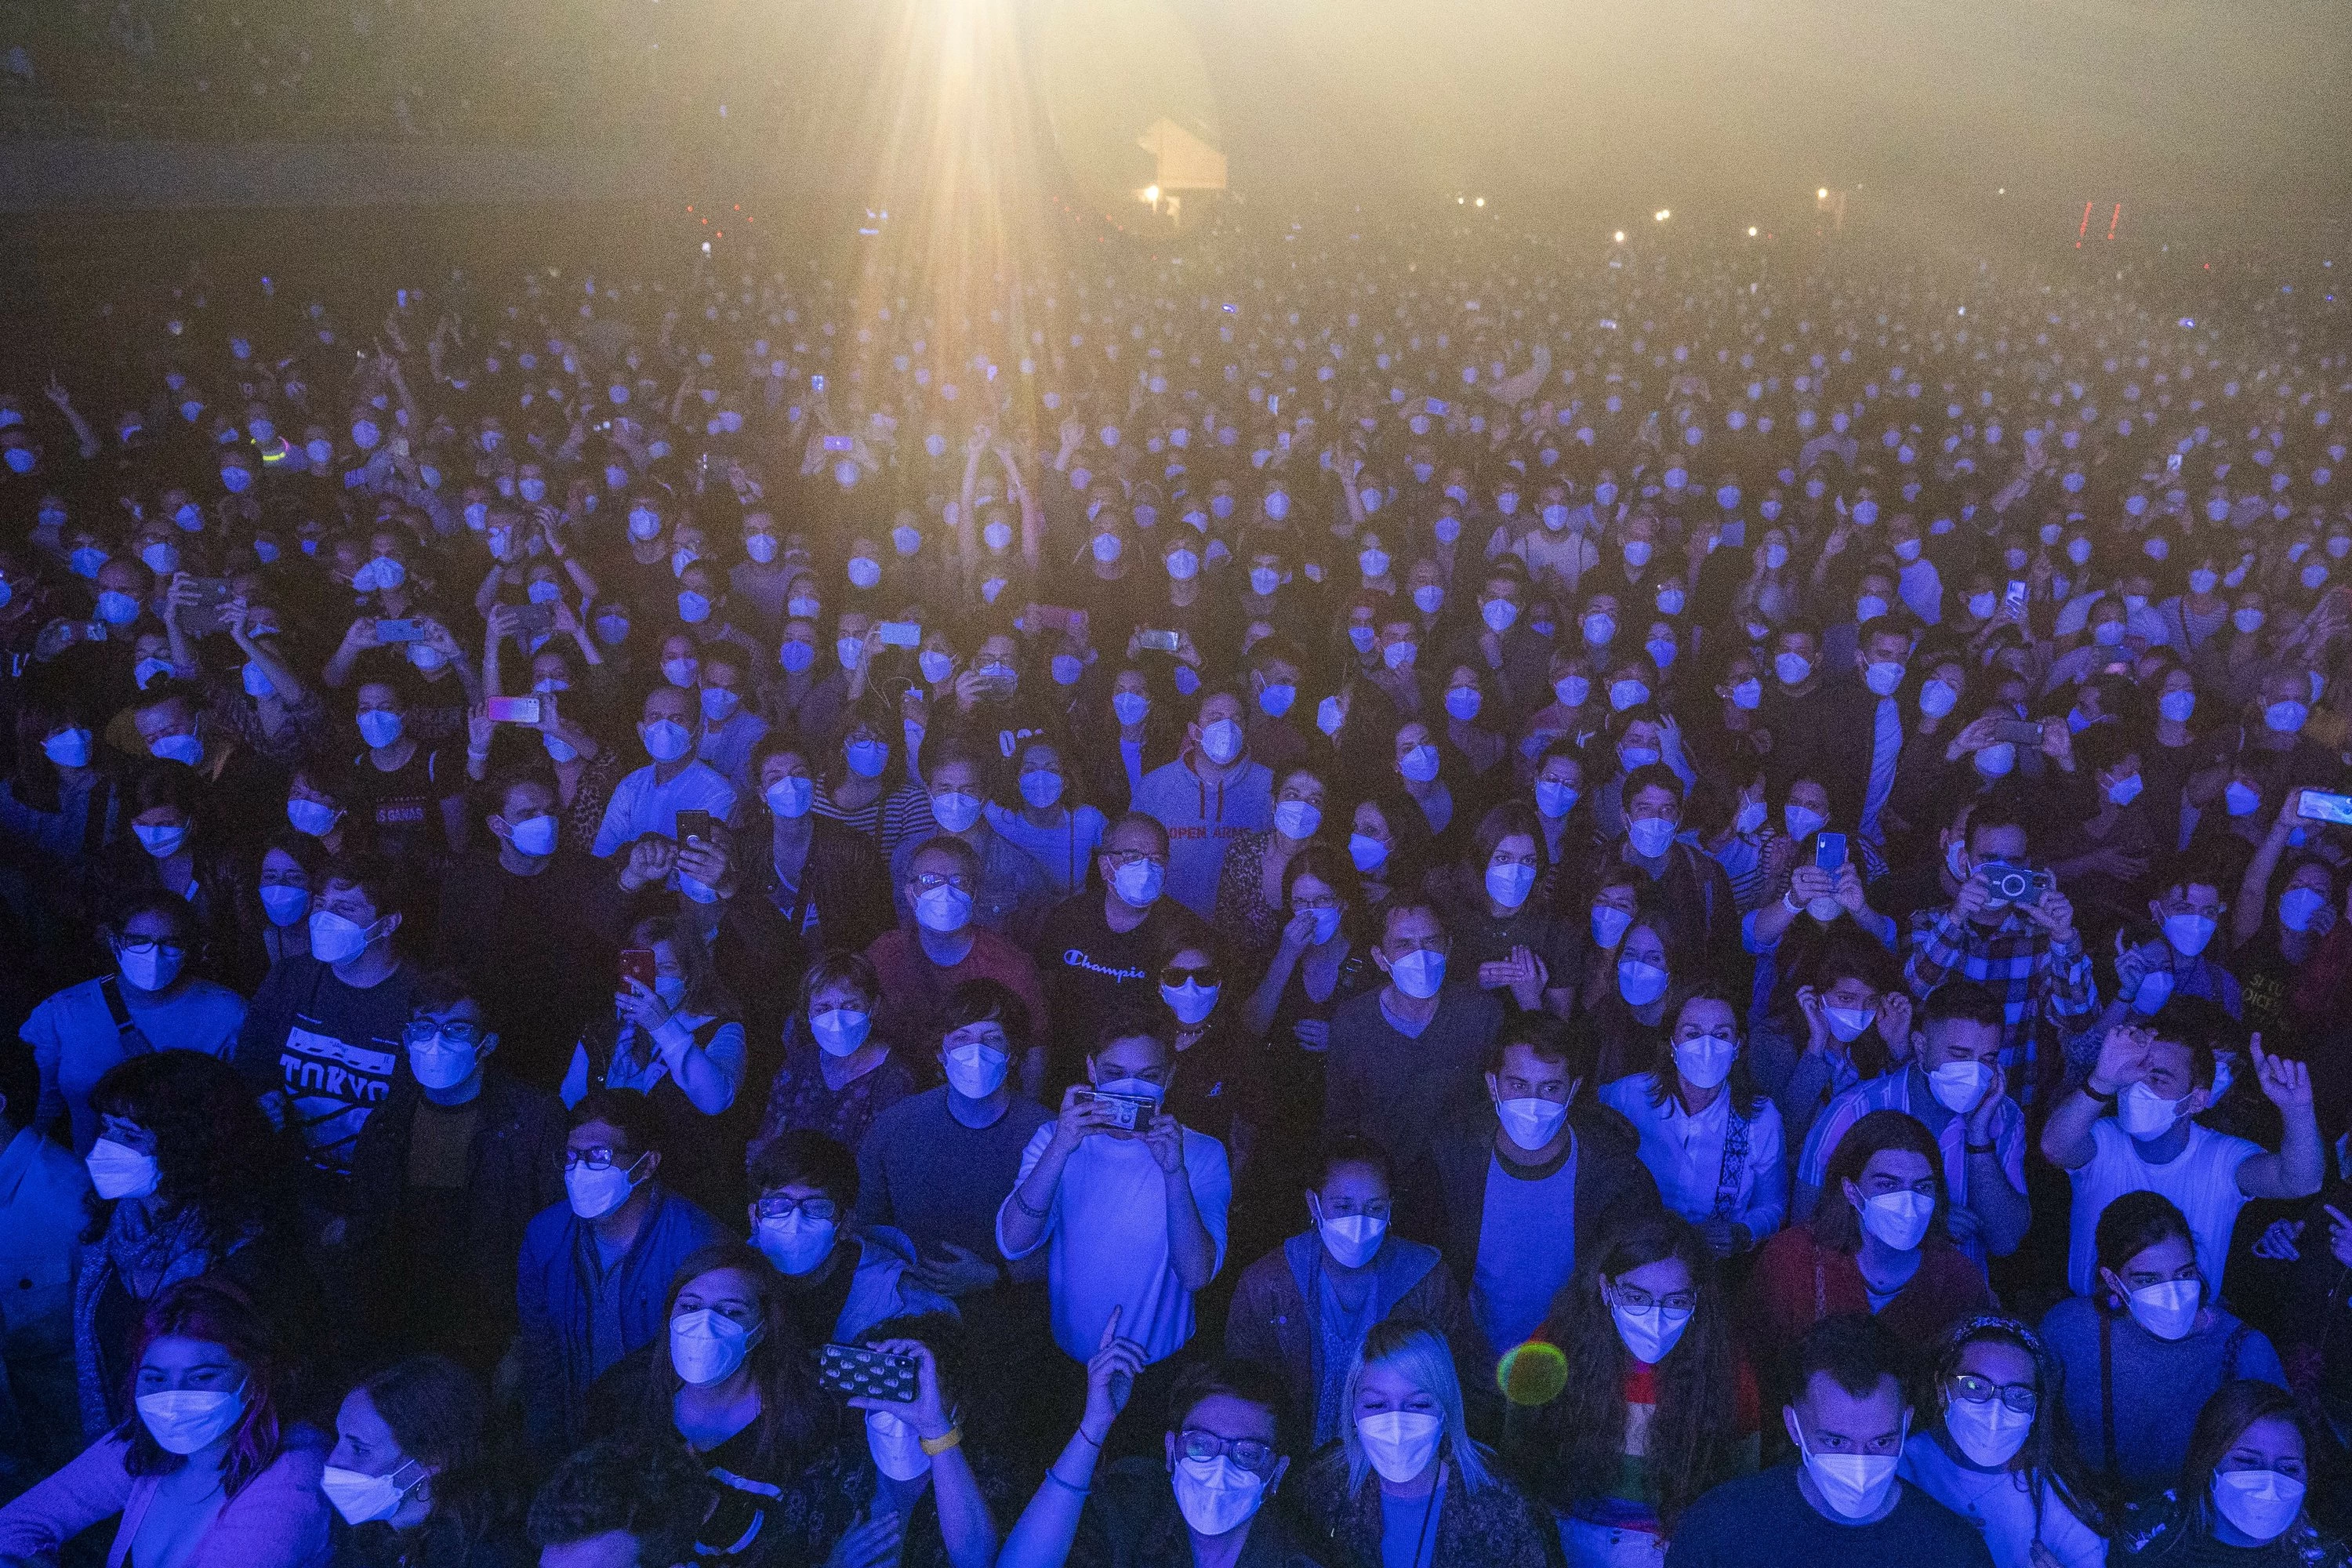 5,000 music fans attend rock concert in Spain after COVID-19 screening